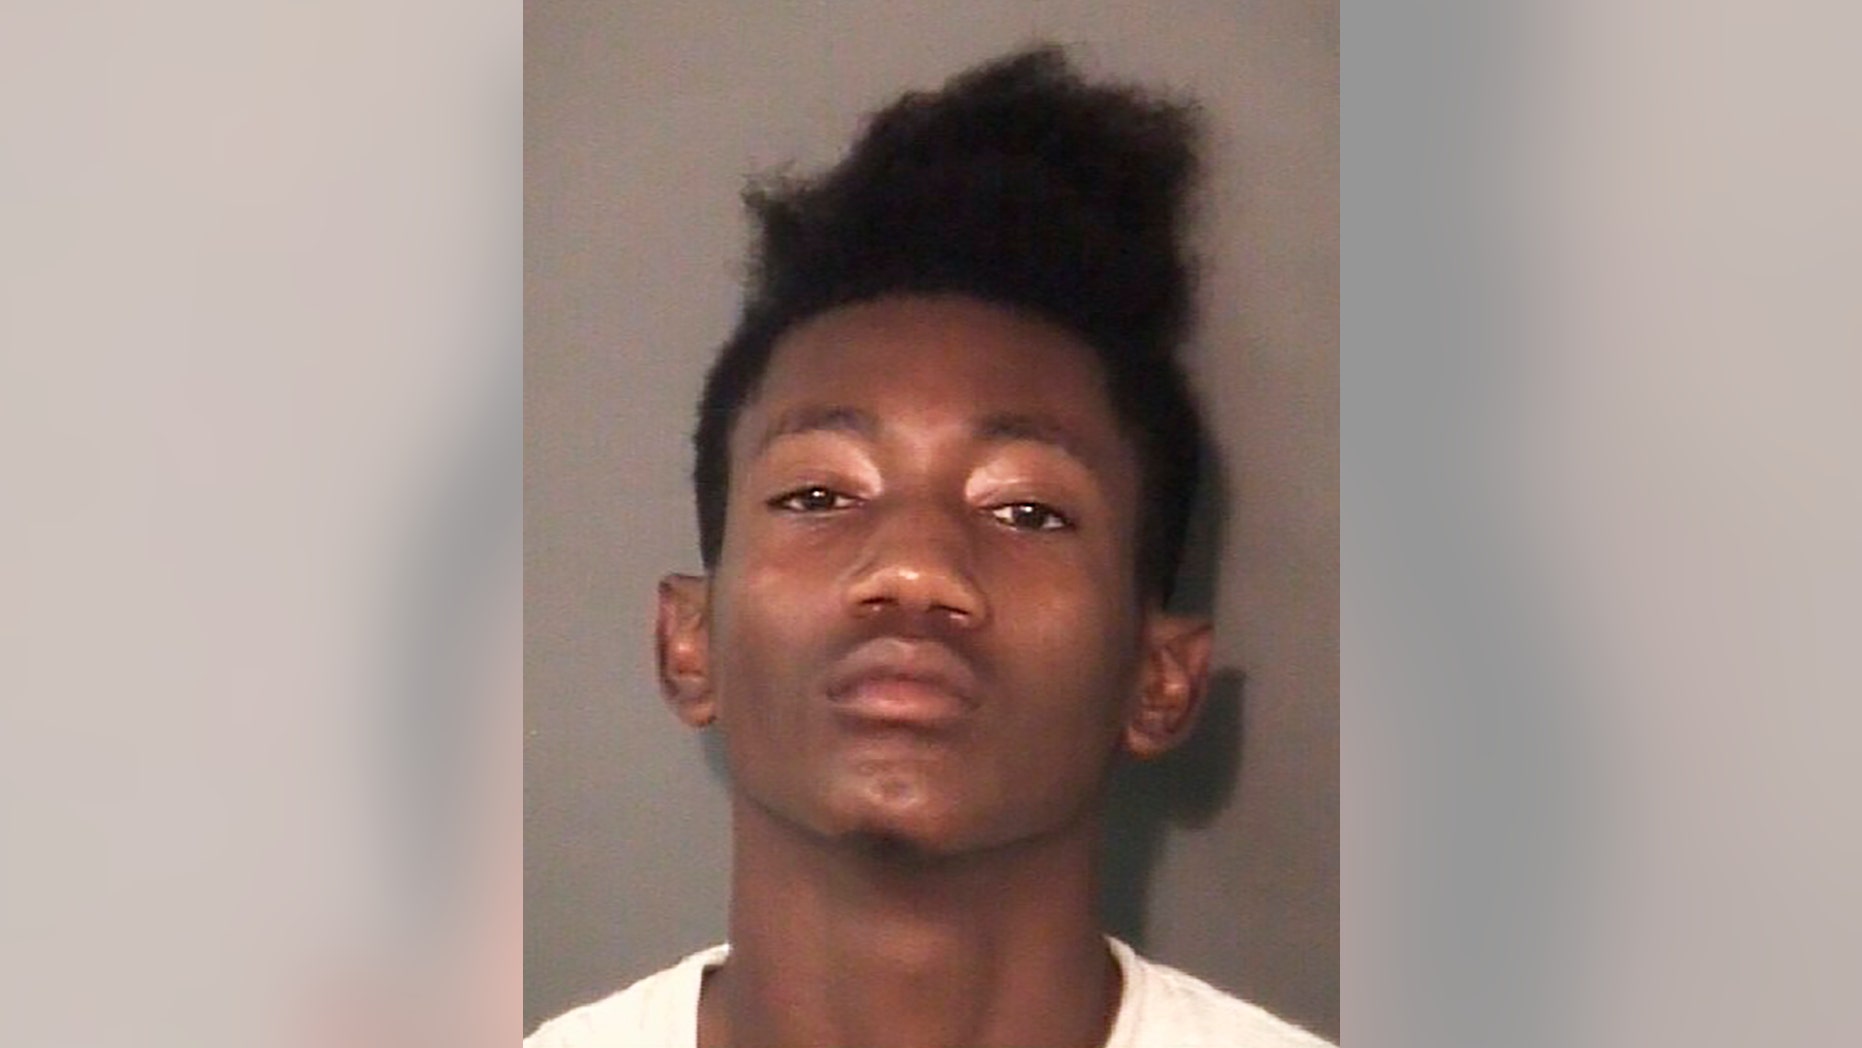 This undated photo provided by the Sheriff's Office of Orange County, North America, shows Jataveon Dashawn Hall. The alleged burglar with a machete was arrested nearly two days after leaving the hospital where he was being treated. (Orange County Sheriff's Office via AP)